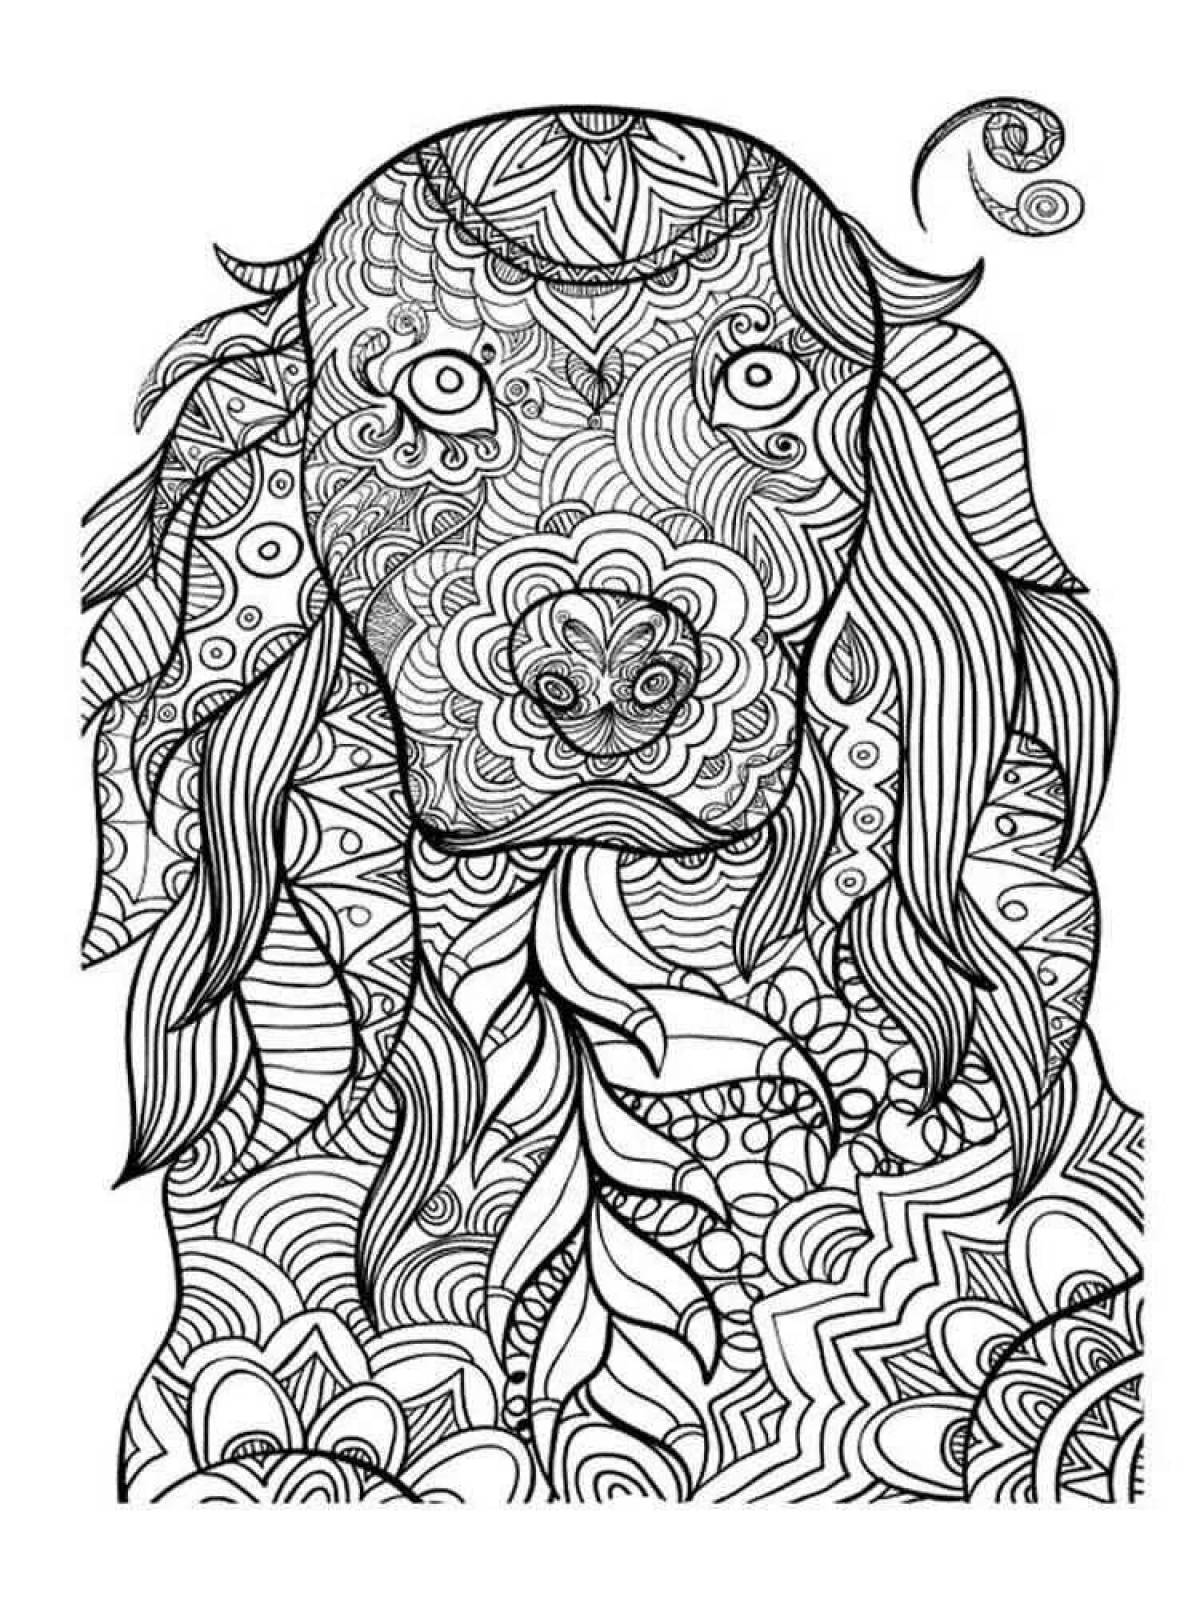 Brave dogs coloring pages for adults